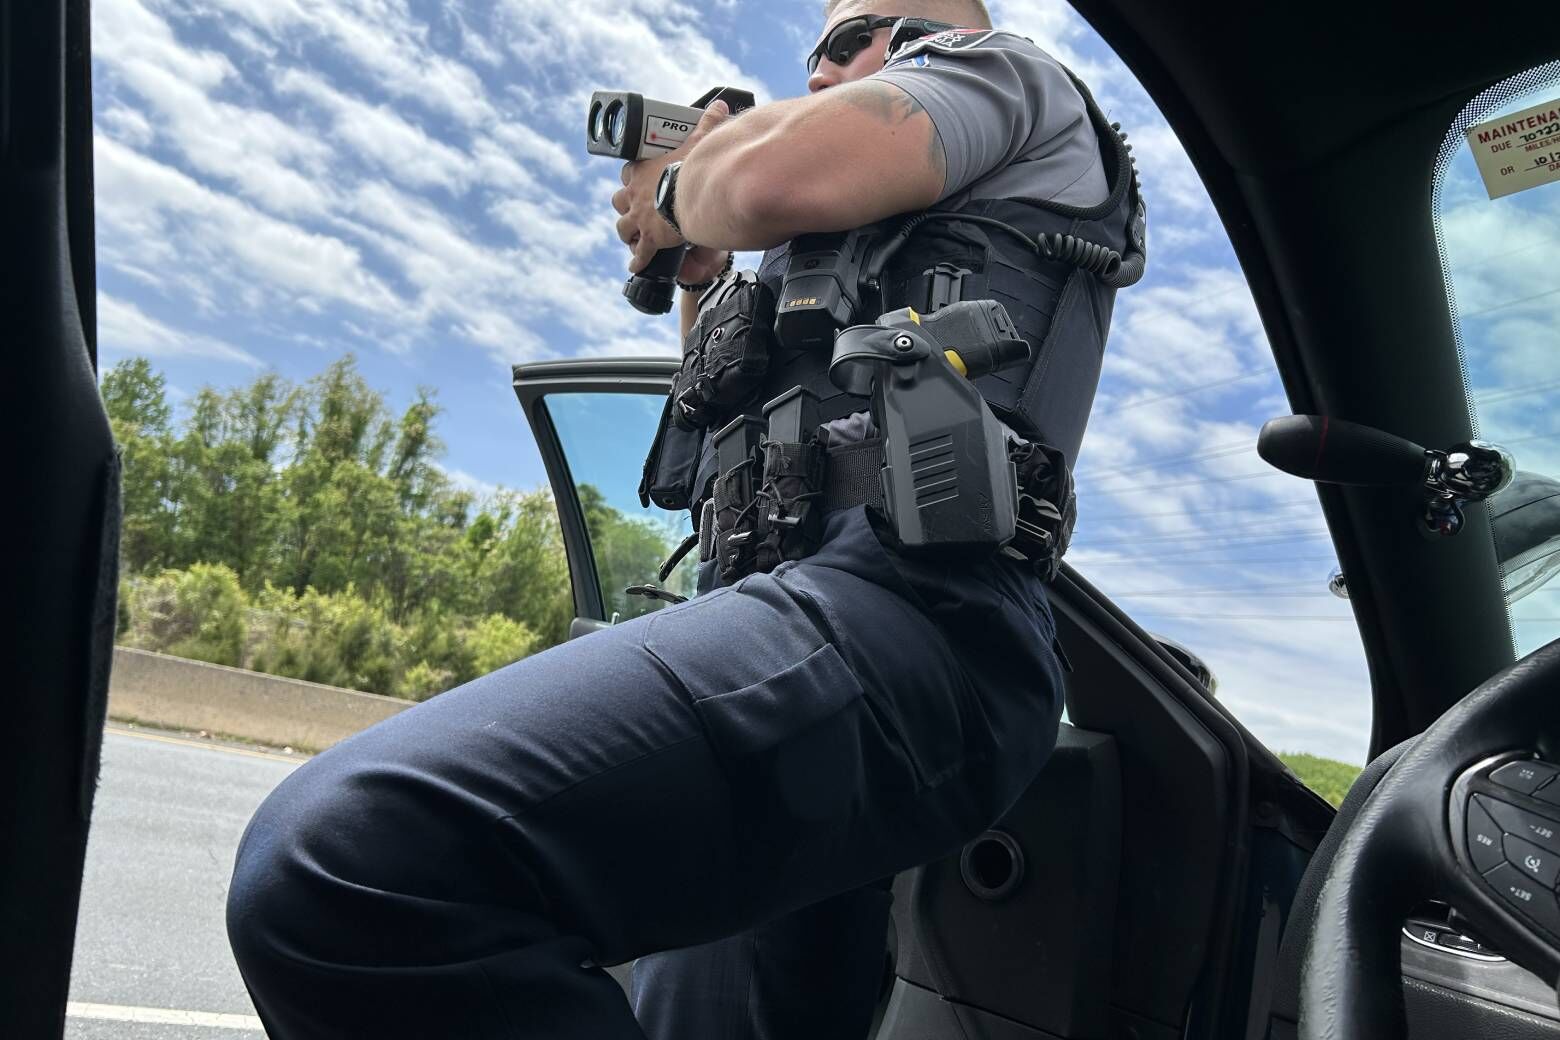 Fairfax County Police Officer Kevin Gehr uses what's known as a lidar gun to detect drivers' speeds. (WTOP/Scott Gelman)